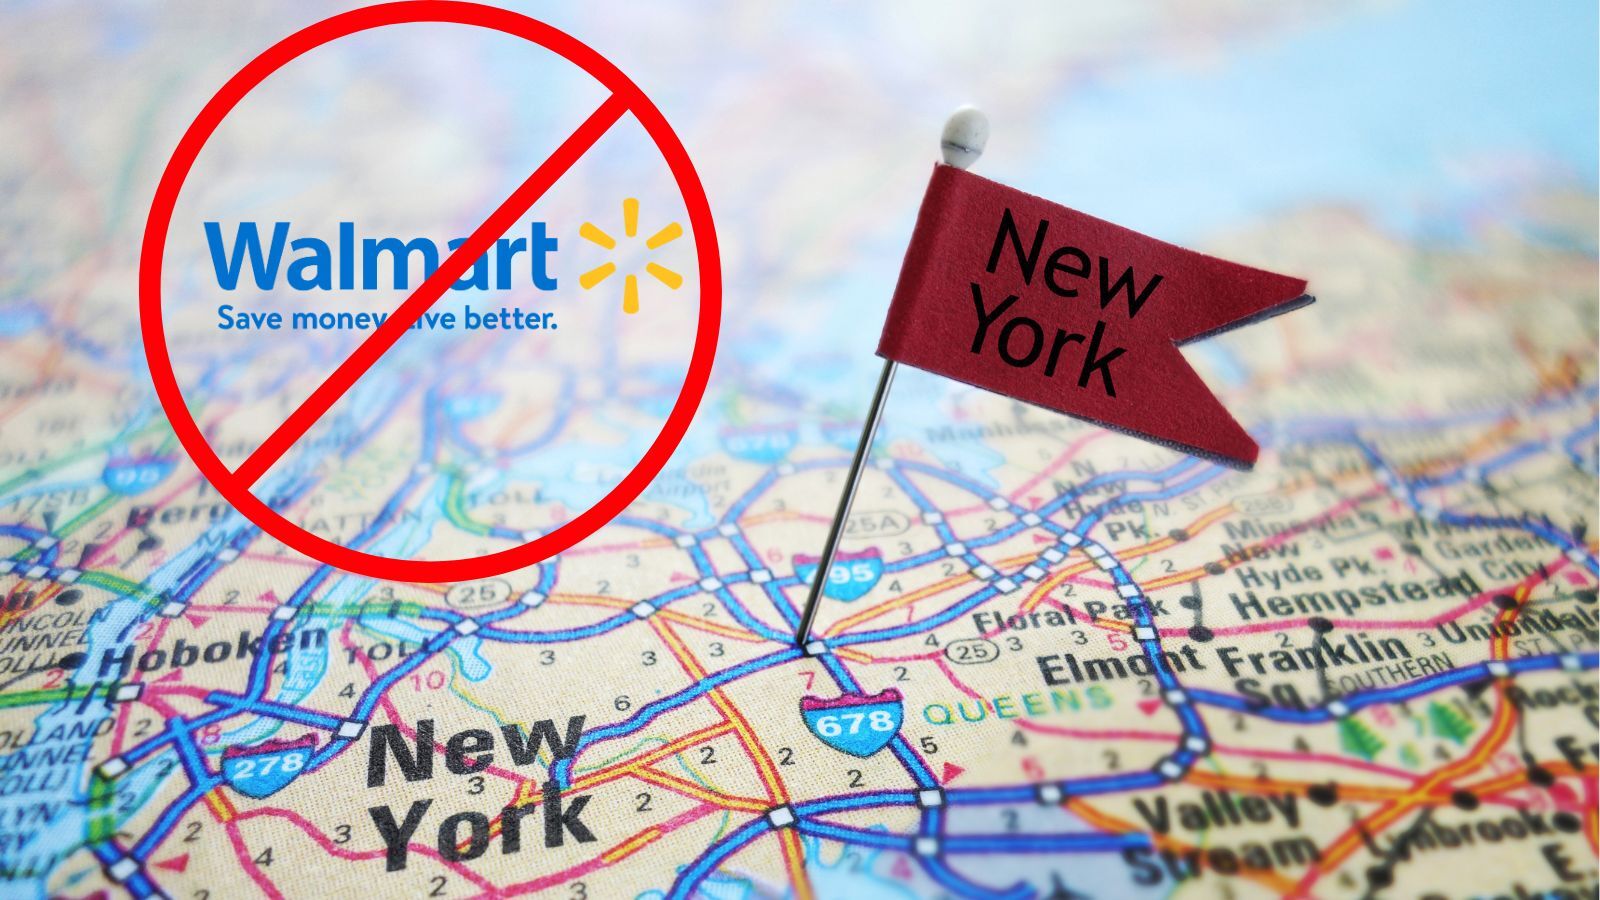 Why Are There No Walmarts In New York City?